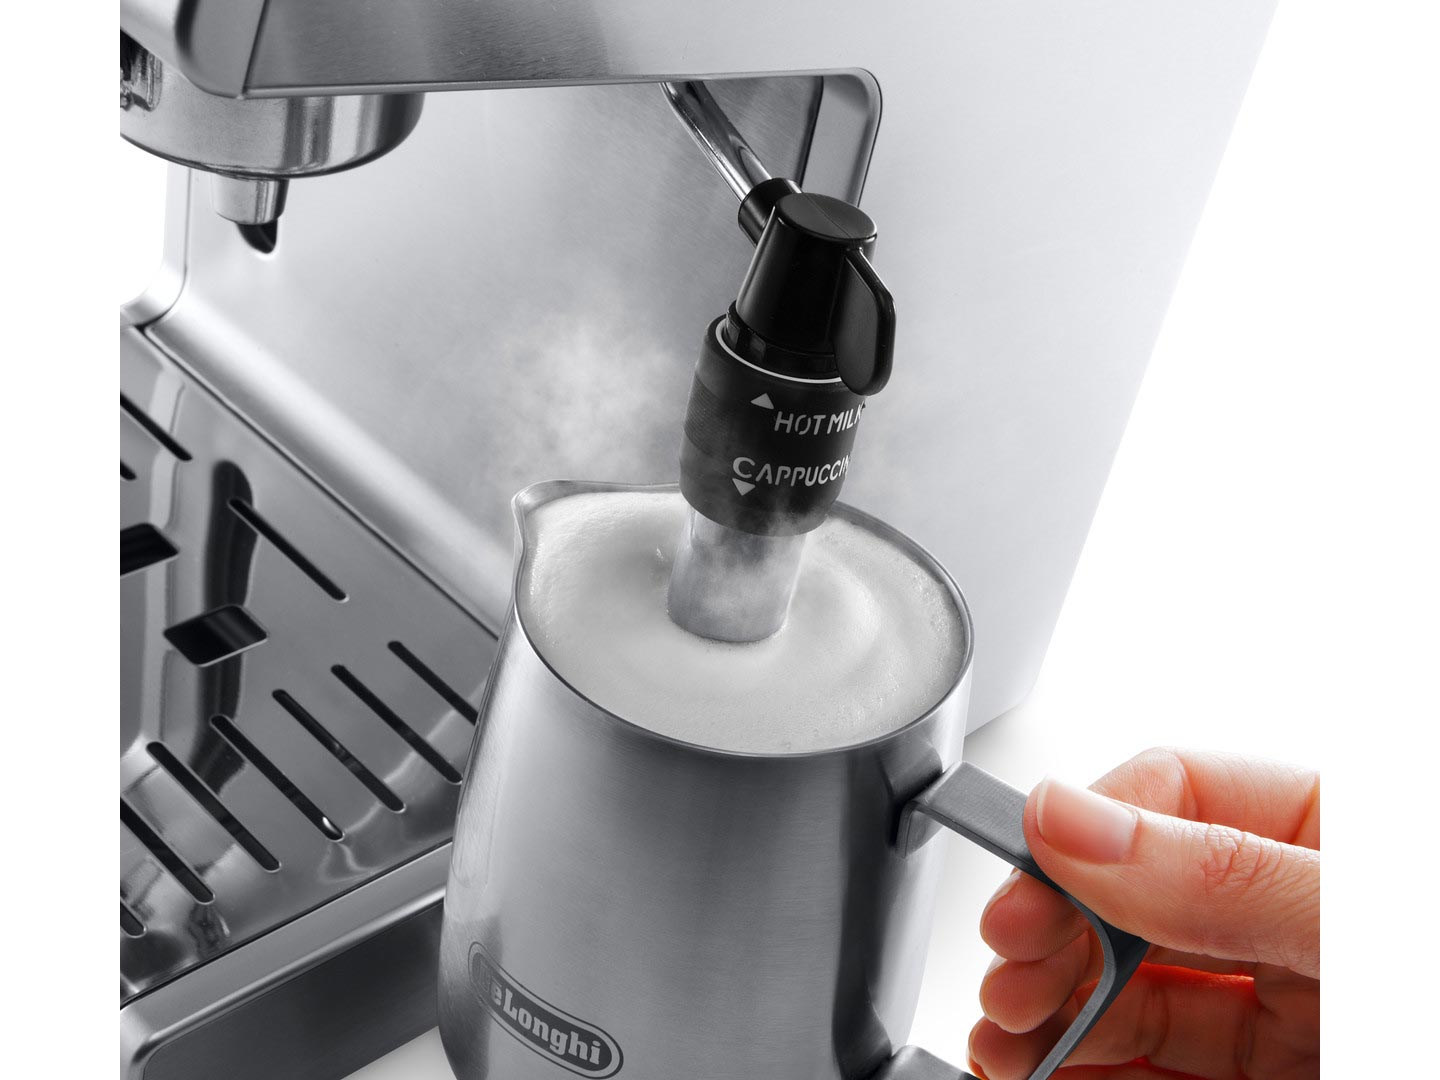 Enhance Your Milk Frothing Stainless Steel Steam Wand for DeLonghi Machines